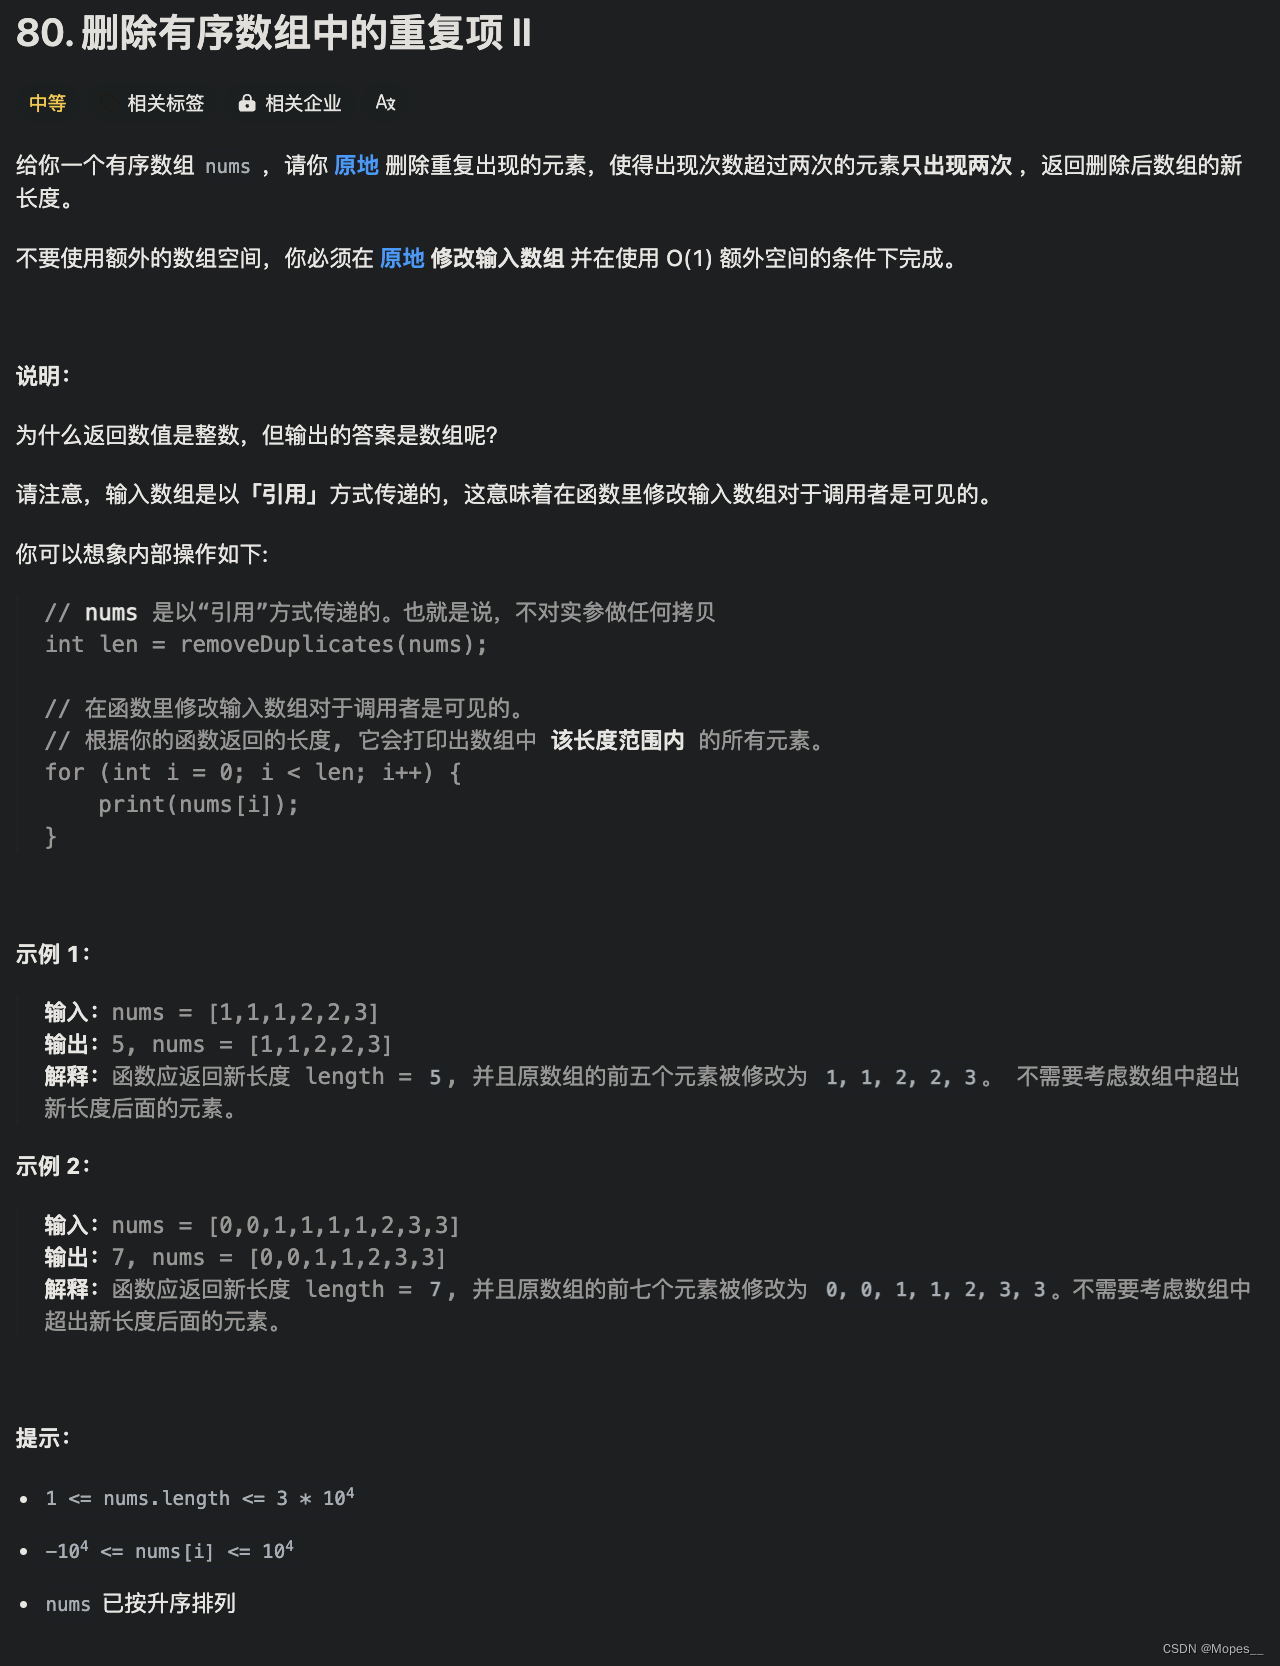 Python | <span style='color:red;'>Leetcode</span> Python题解之第<span style='color:red;'>80</span>题<span style='color:red;'>删除</span><span style='color:red;'>有序</span><span style='color:red;'>数组</span><span style='color:red;'>中</span><span style='color:red;'>的</span><span style='color:red;'>重复</span><span style='color:red;'>项</span><span style='color:red;'>II</span>